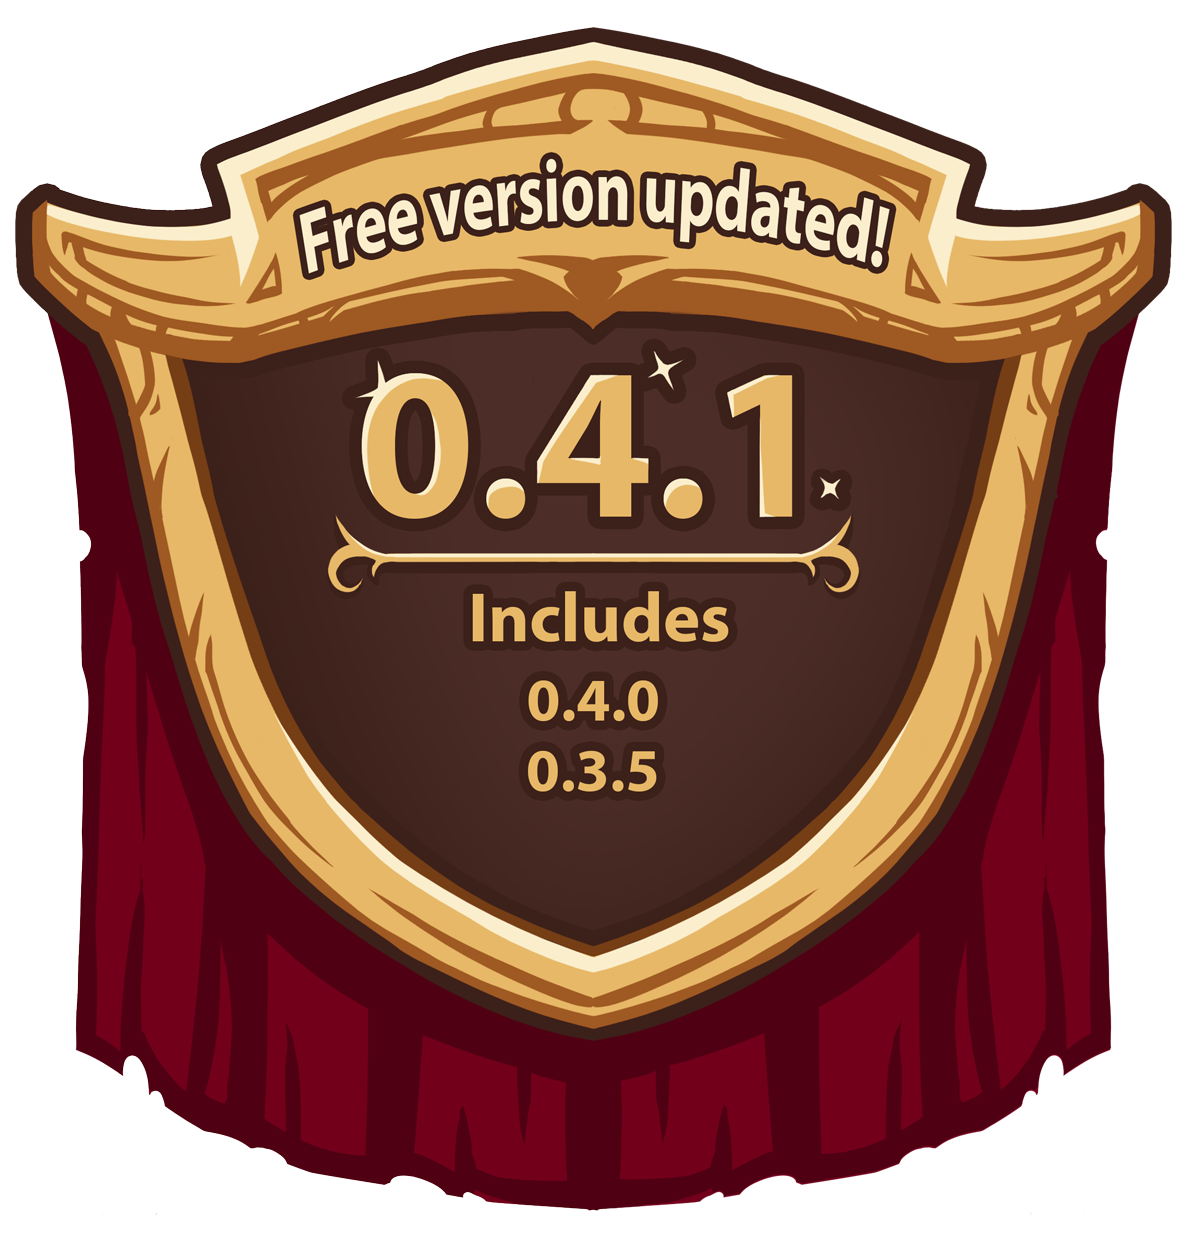 Free version updated to 0.4.1